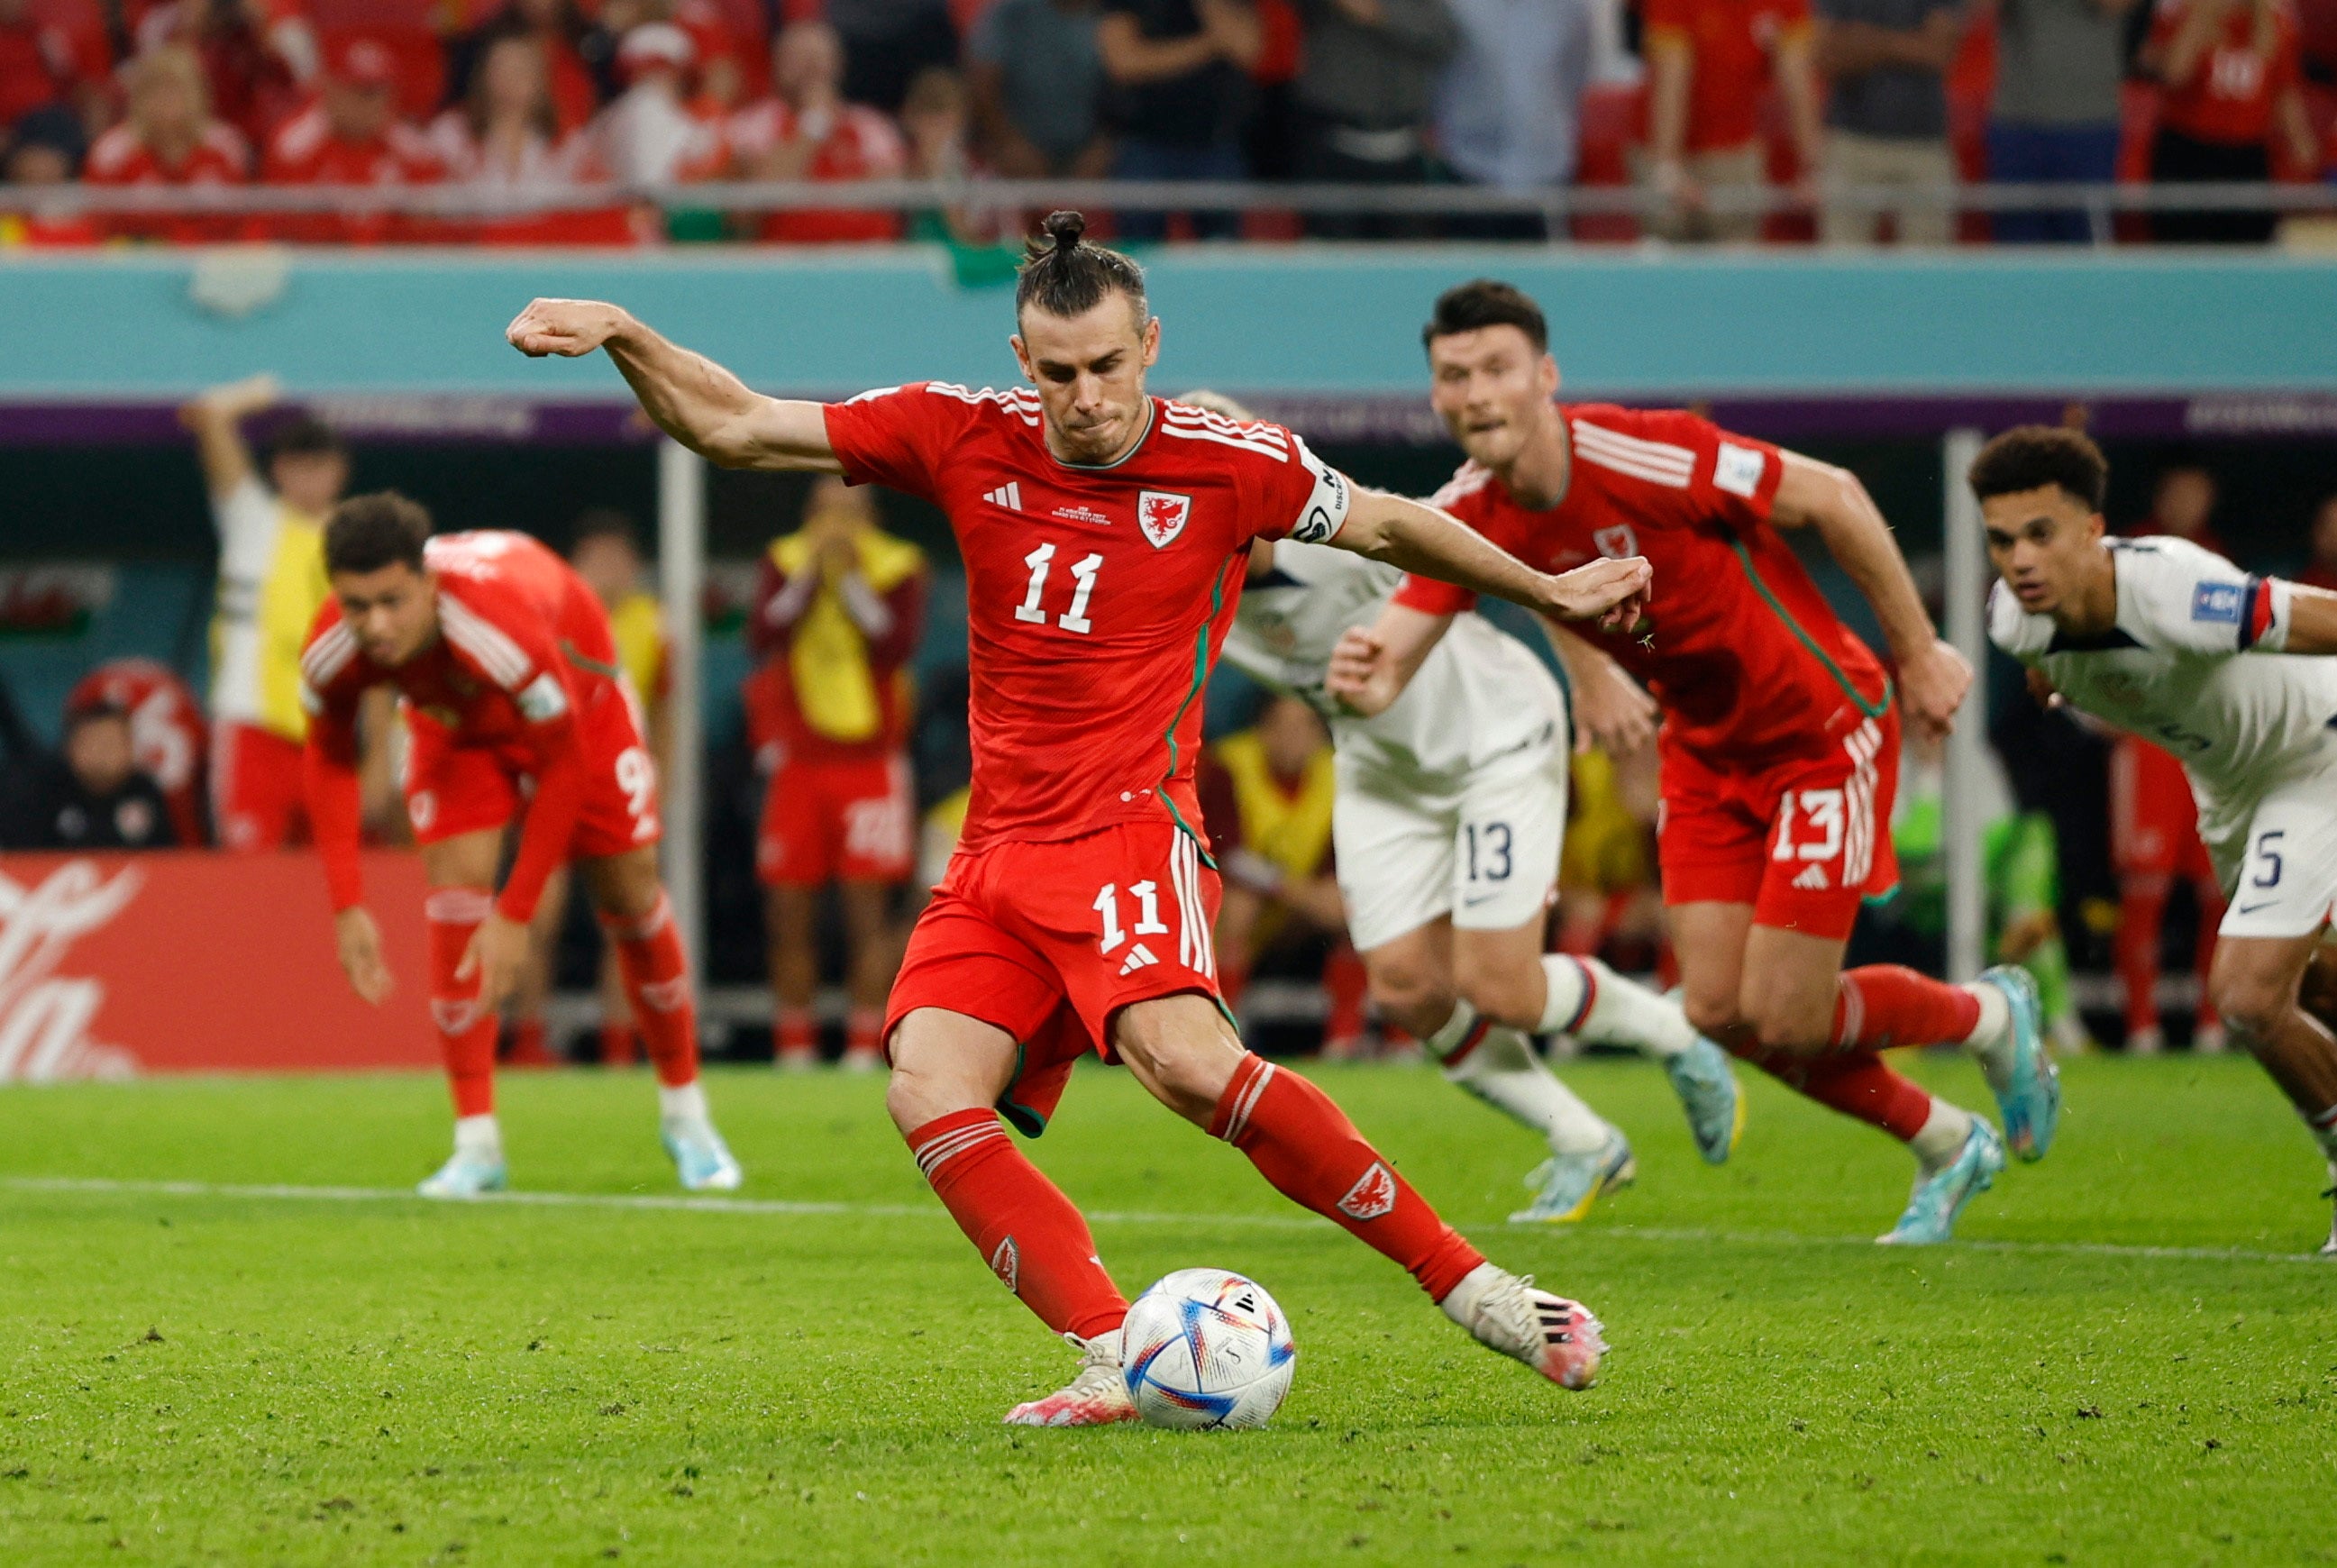 Gareth Bales slams home a penalty for Wales to make it 1-1 against USA